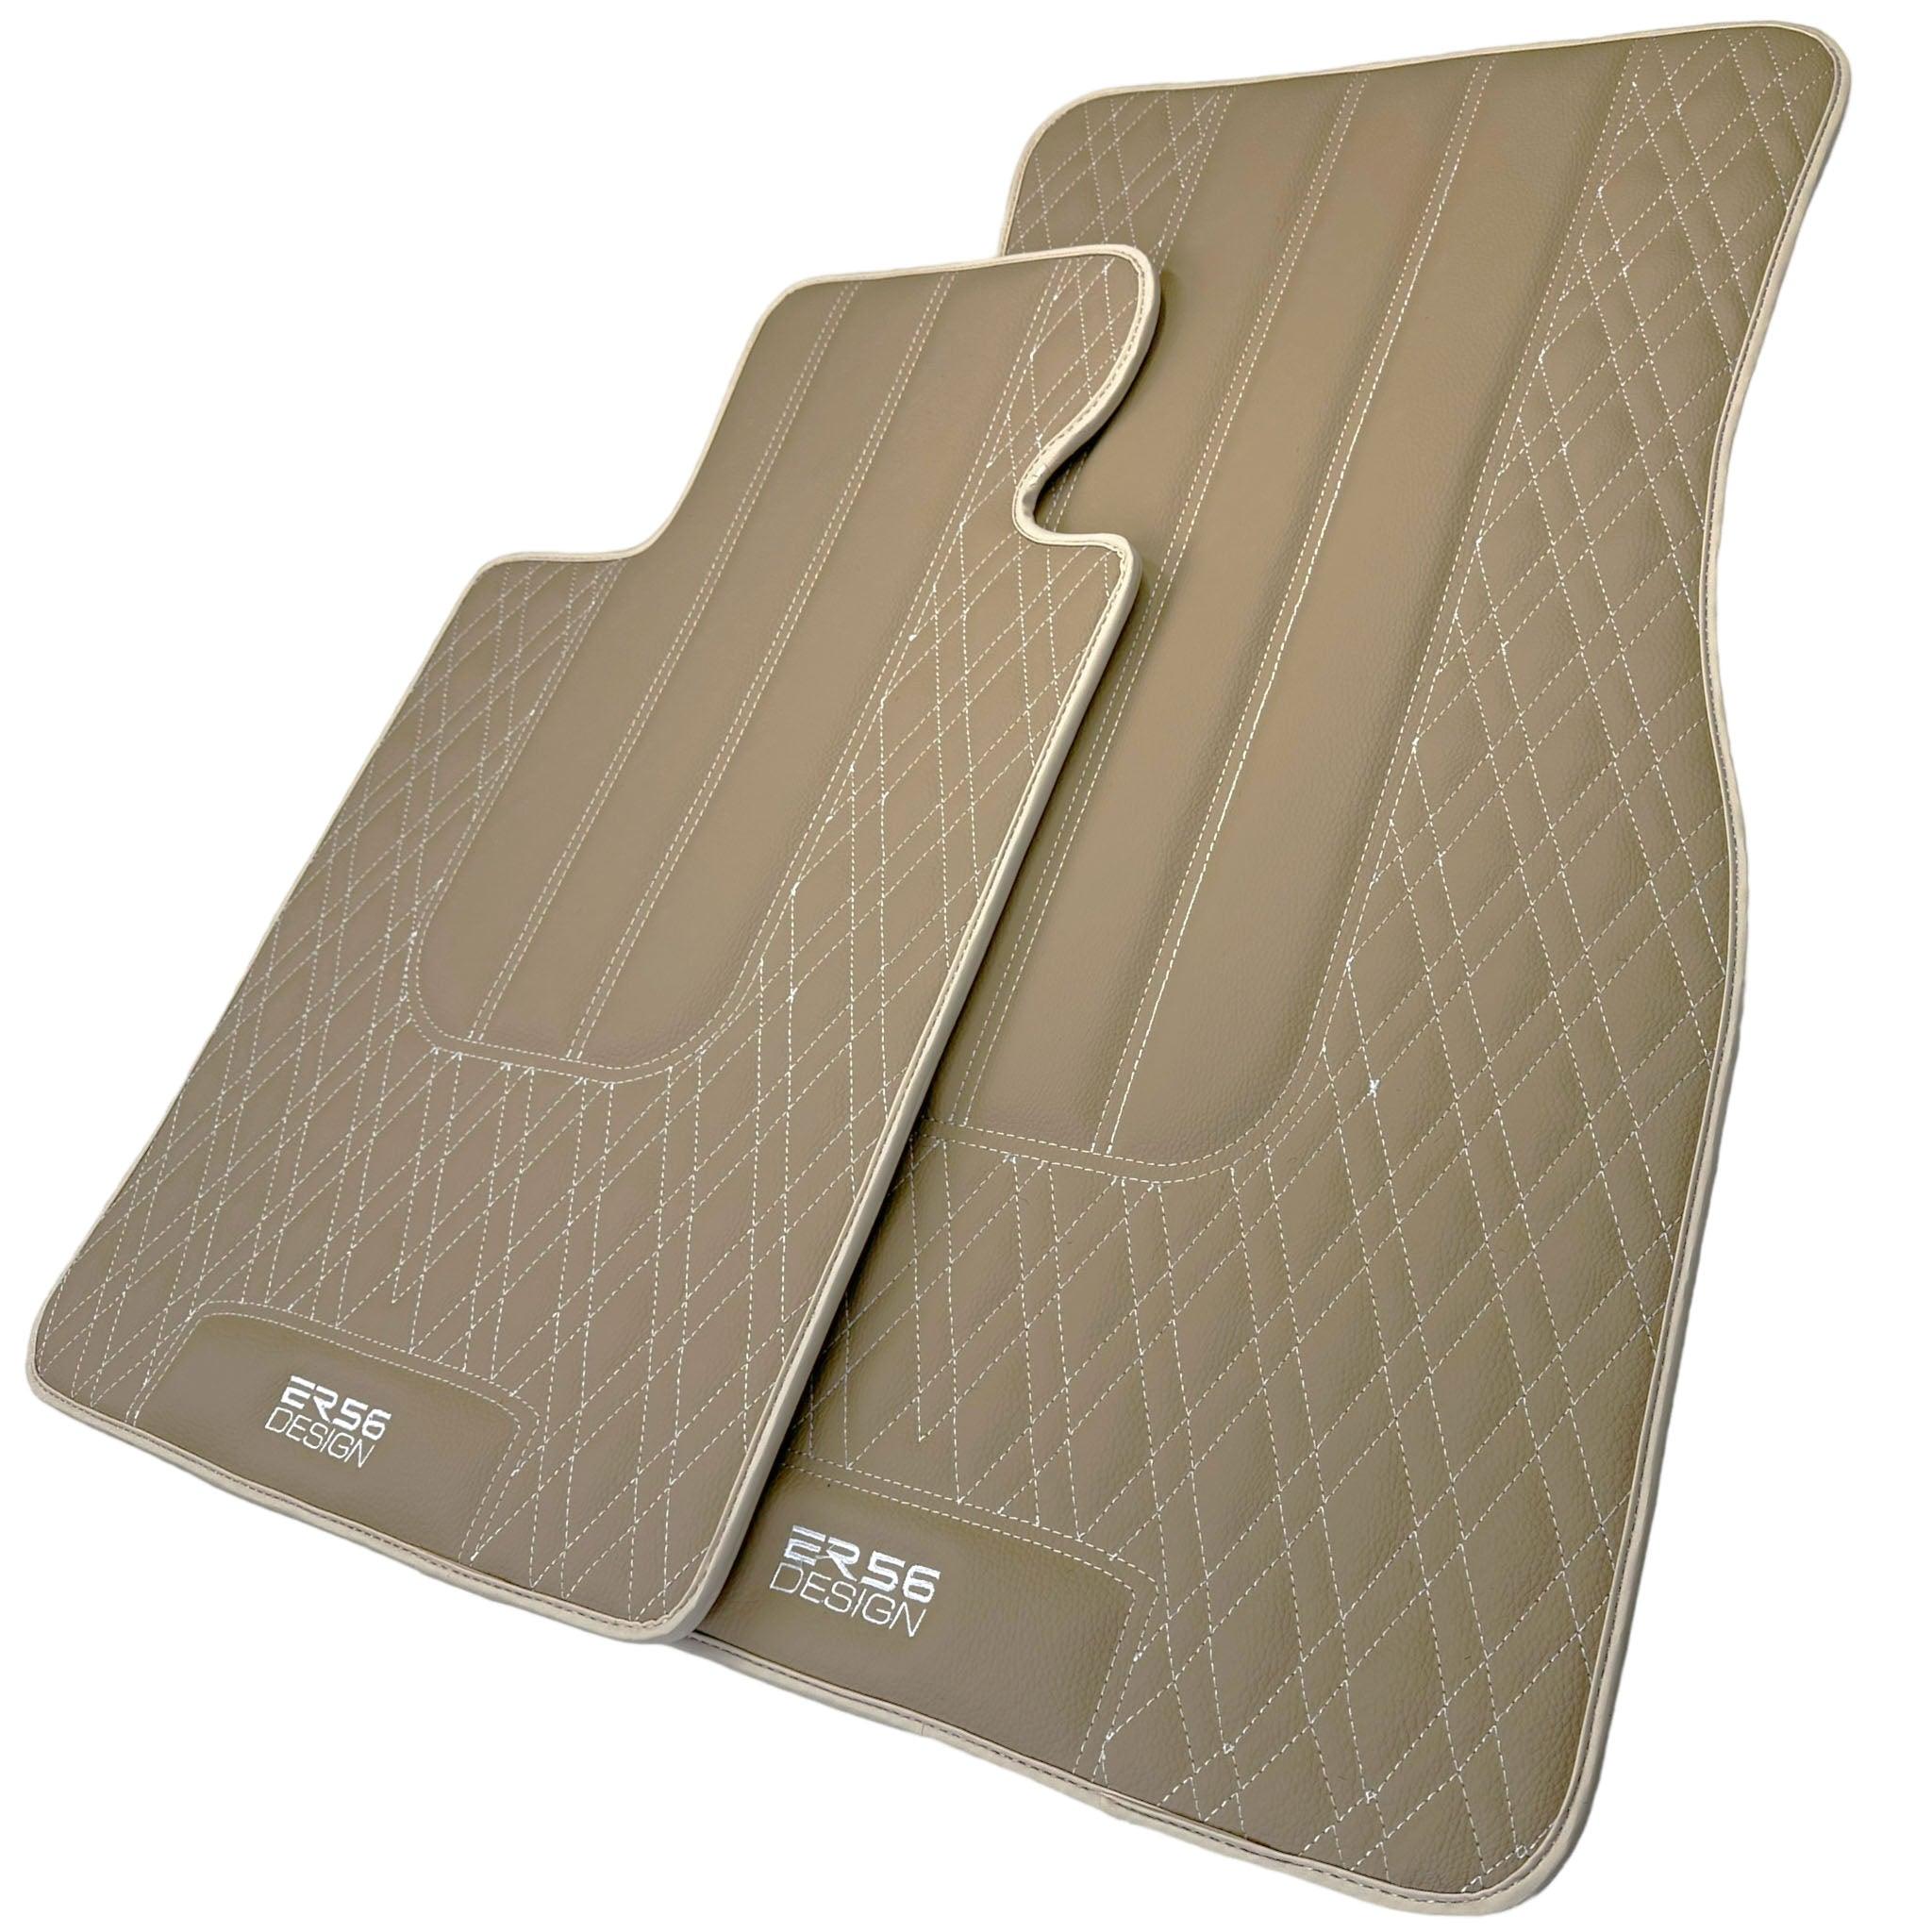 Beige Leather Floor Floor Mats For BMW 3 Series E46 Coupe